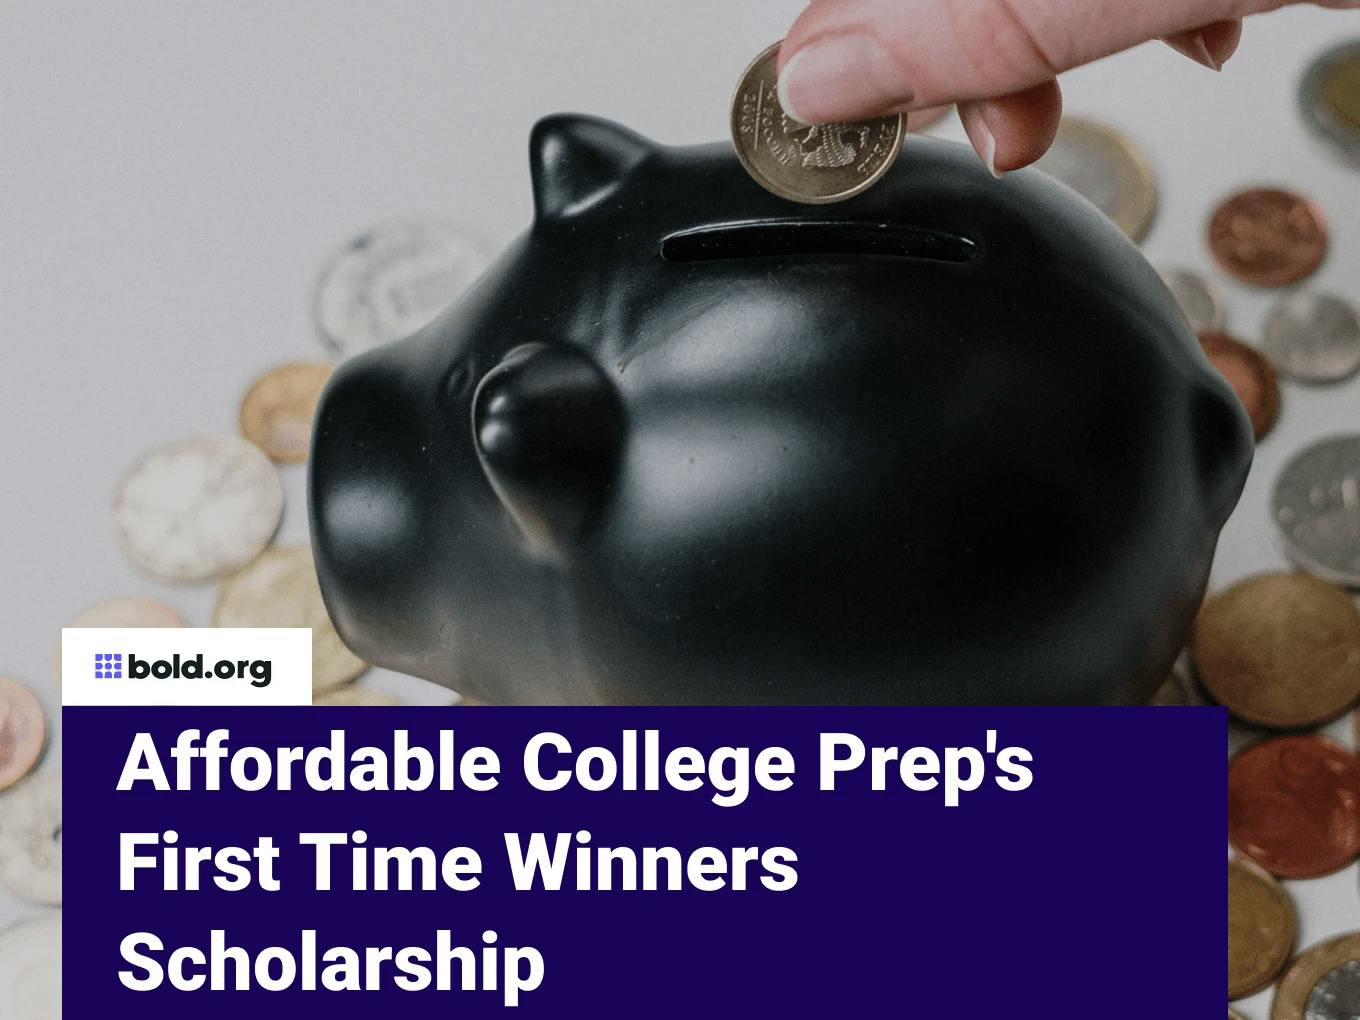 Affordable College Prep's First Time Winners Scholarship